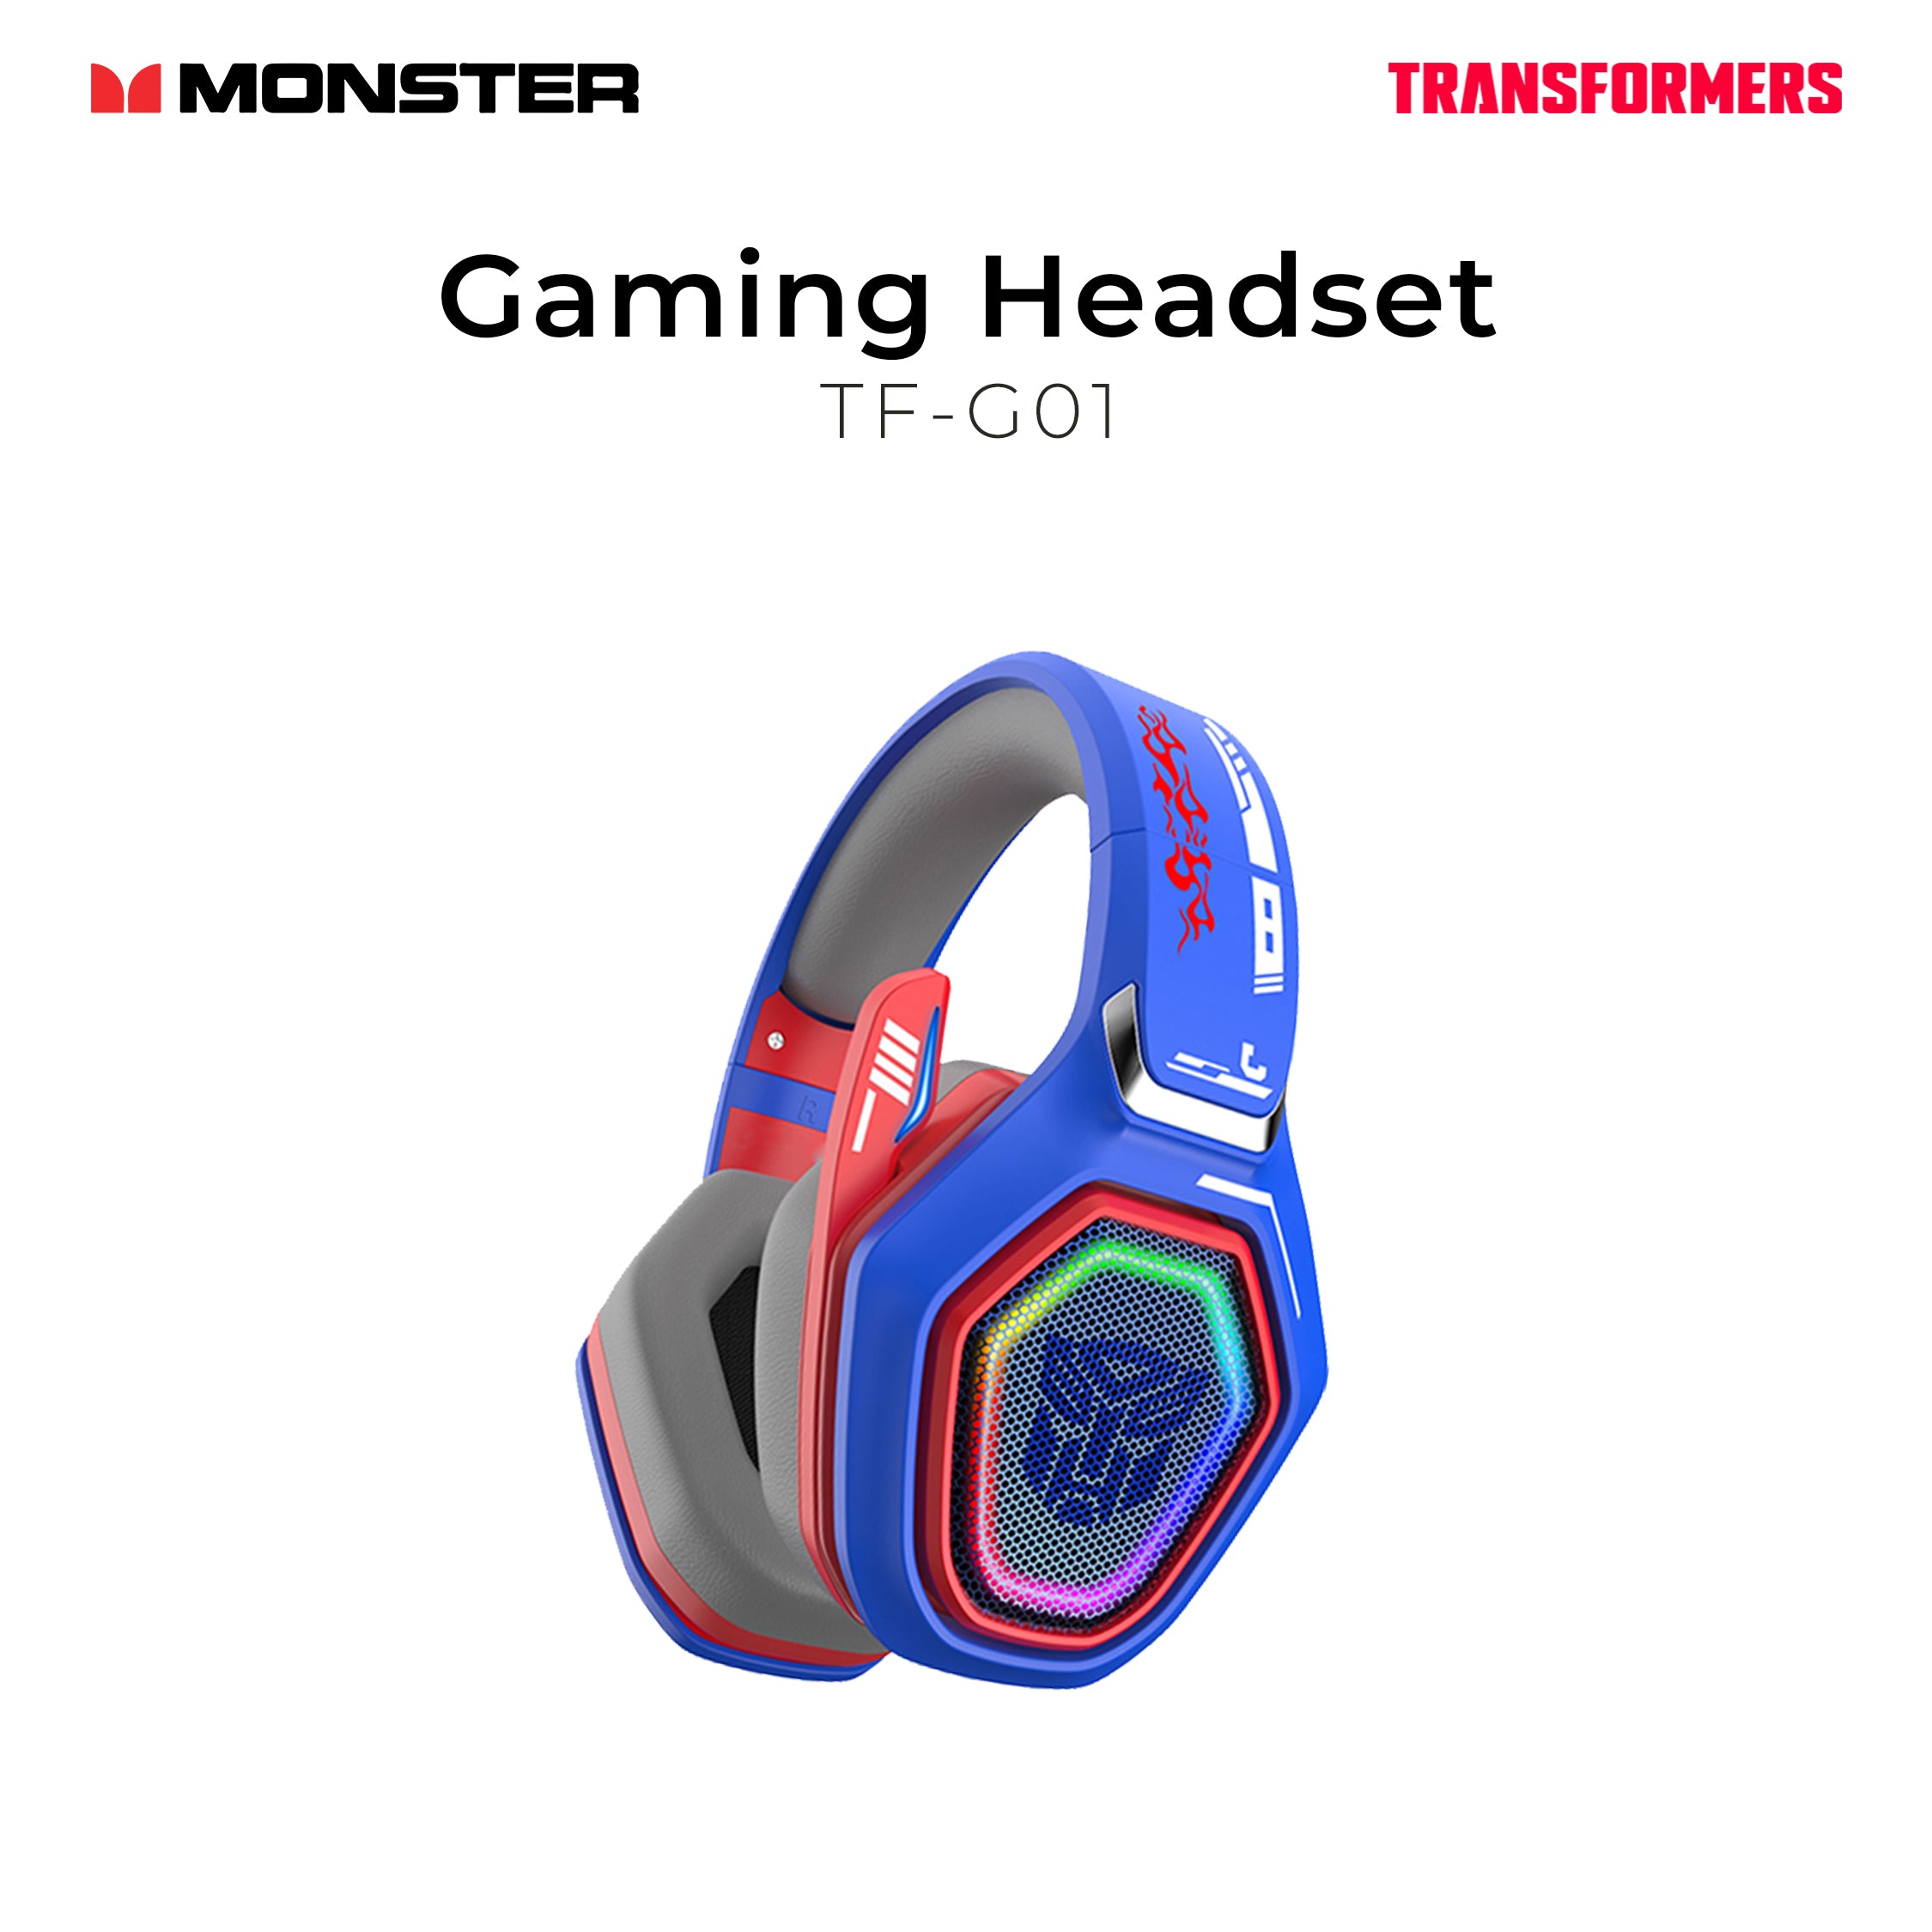 Monster Transformers Gaming Headset TF-G01